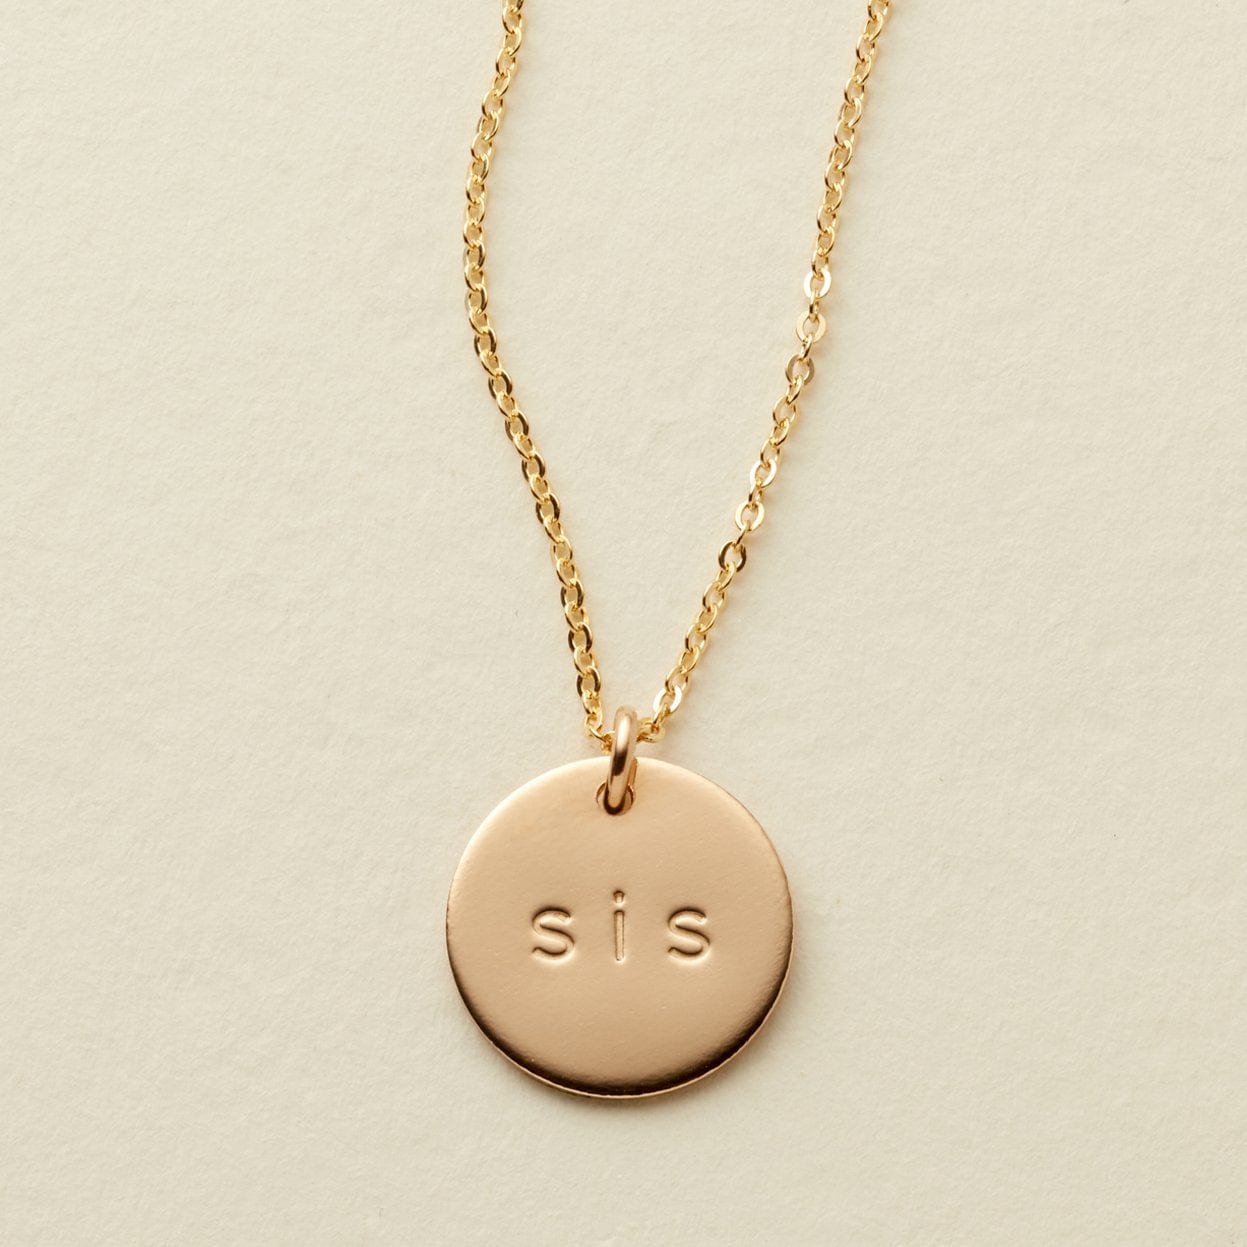 The Sis' Disc Necklace | The Little's Collection Necklace